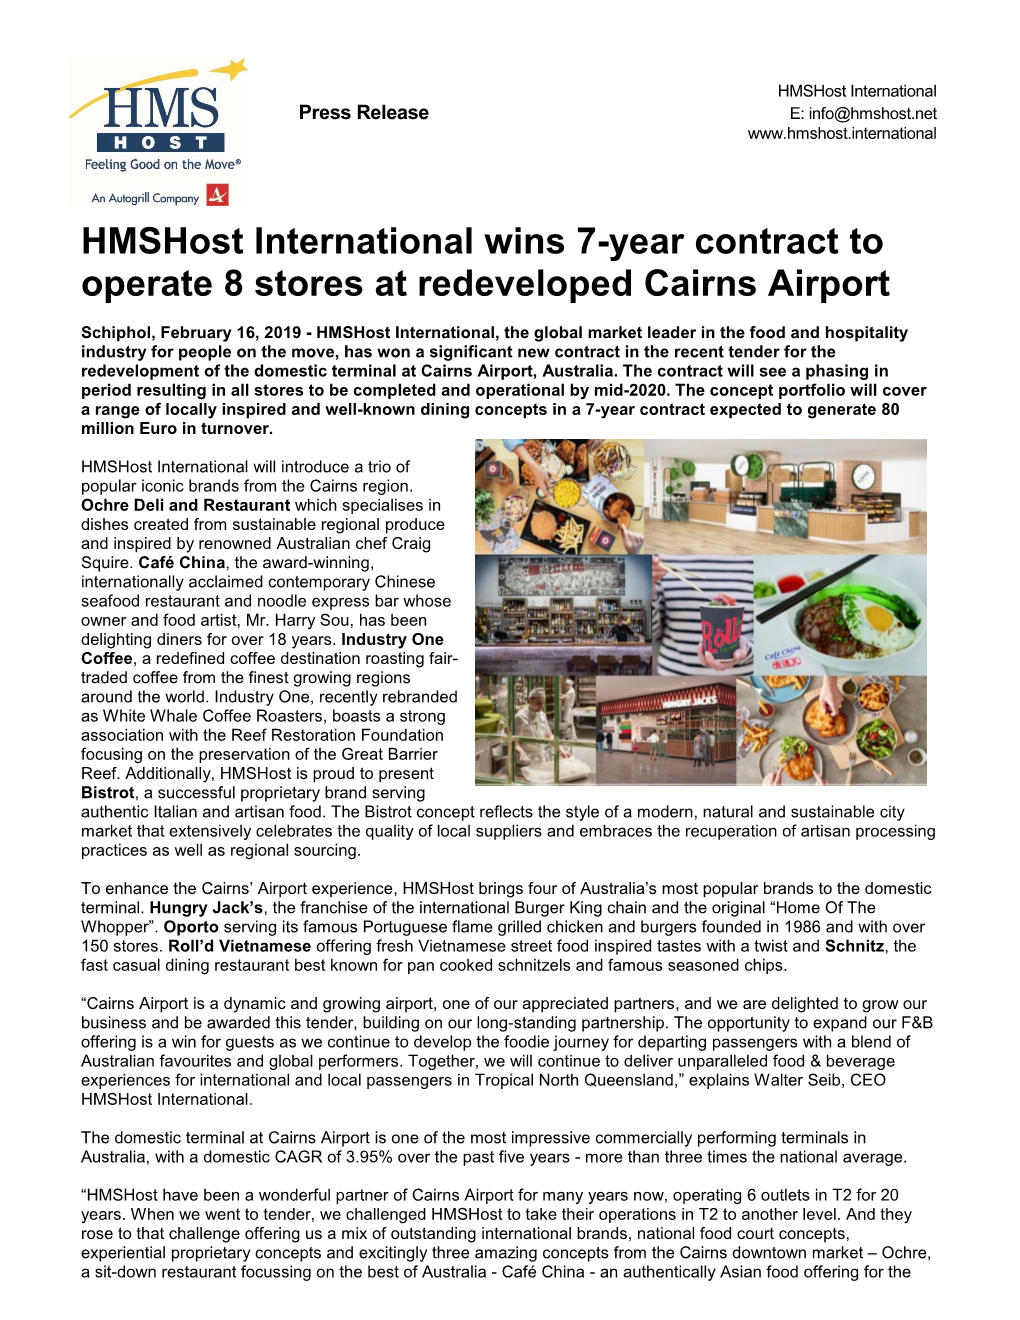 Hmshost International Wins 7-Year Contract to Operate 8 Stores at Redeveloped Cairns Airport